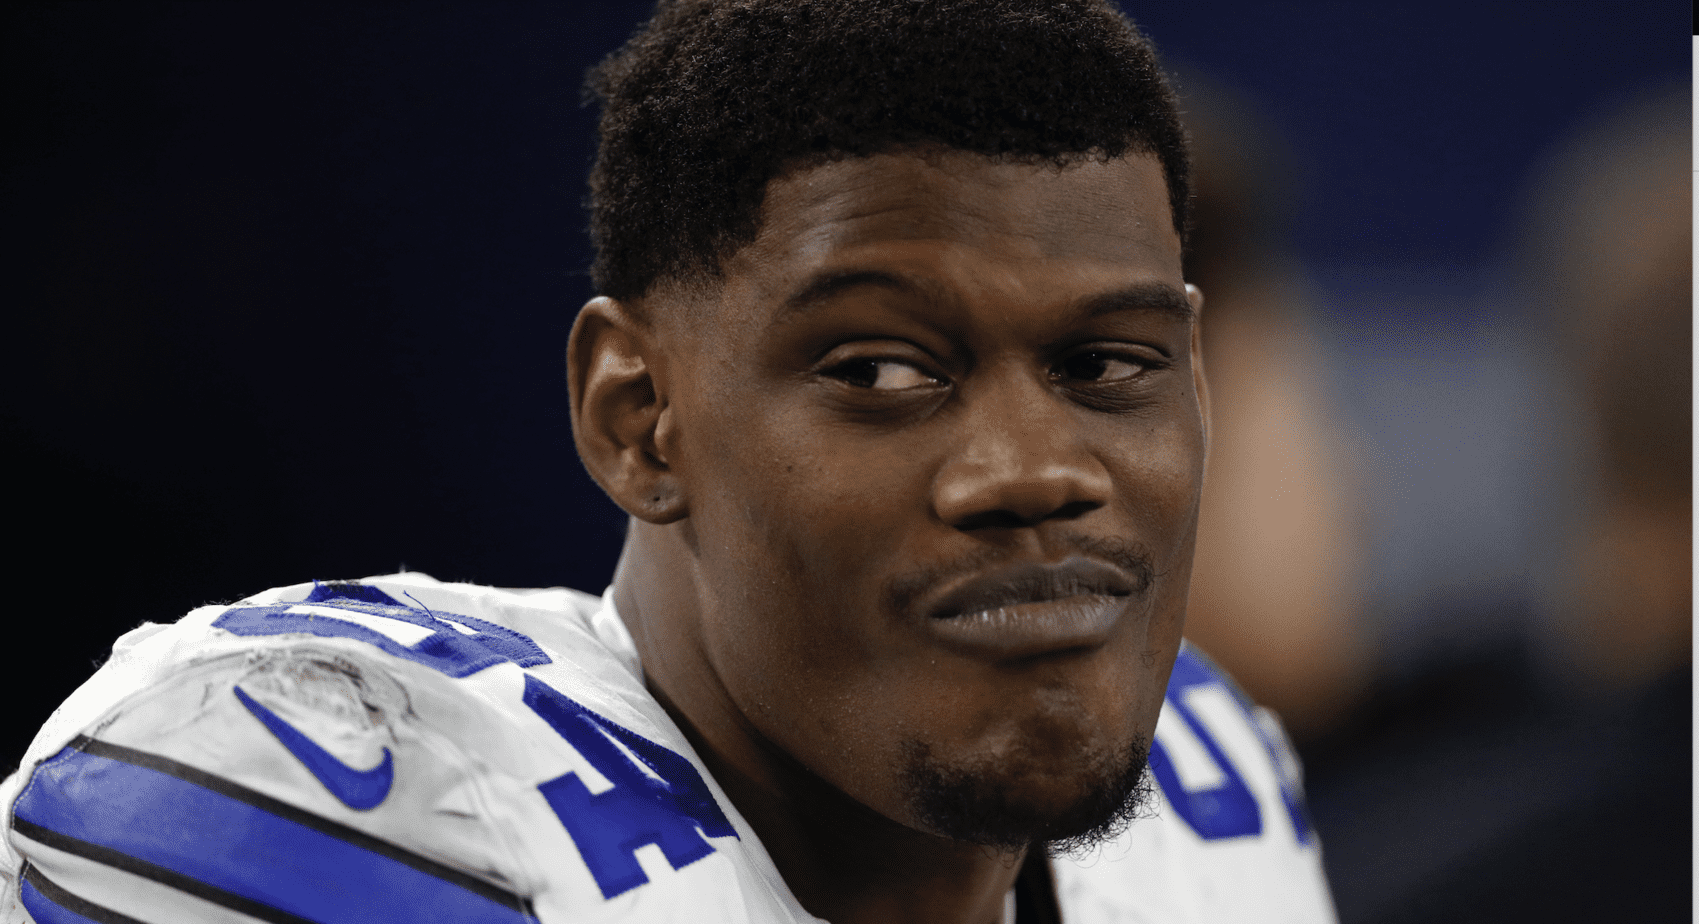 The Denver Broncos hilariously trolled the Cowboys on Tuesday after announcing they had signed Randy Gregory despite reports he was going back to Dallas